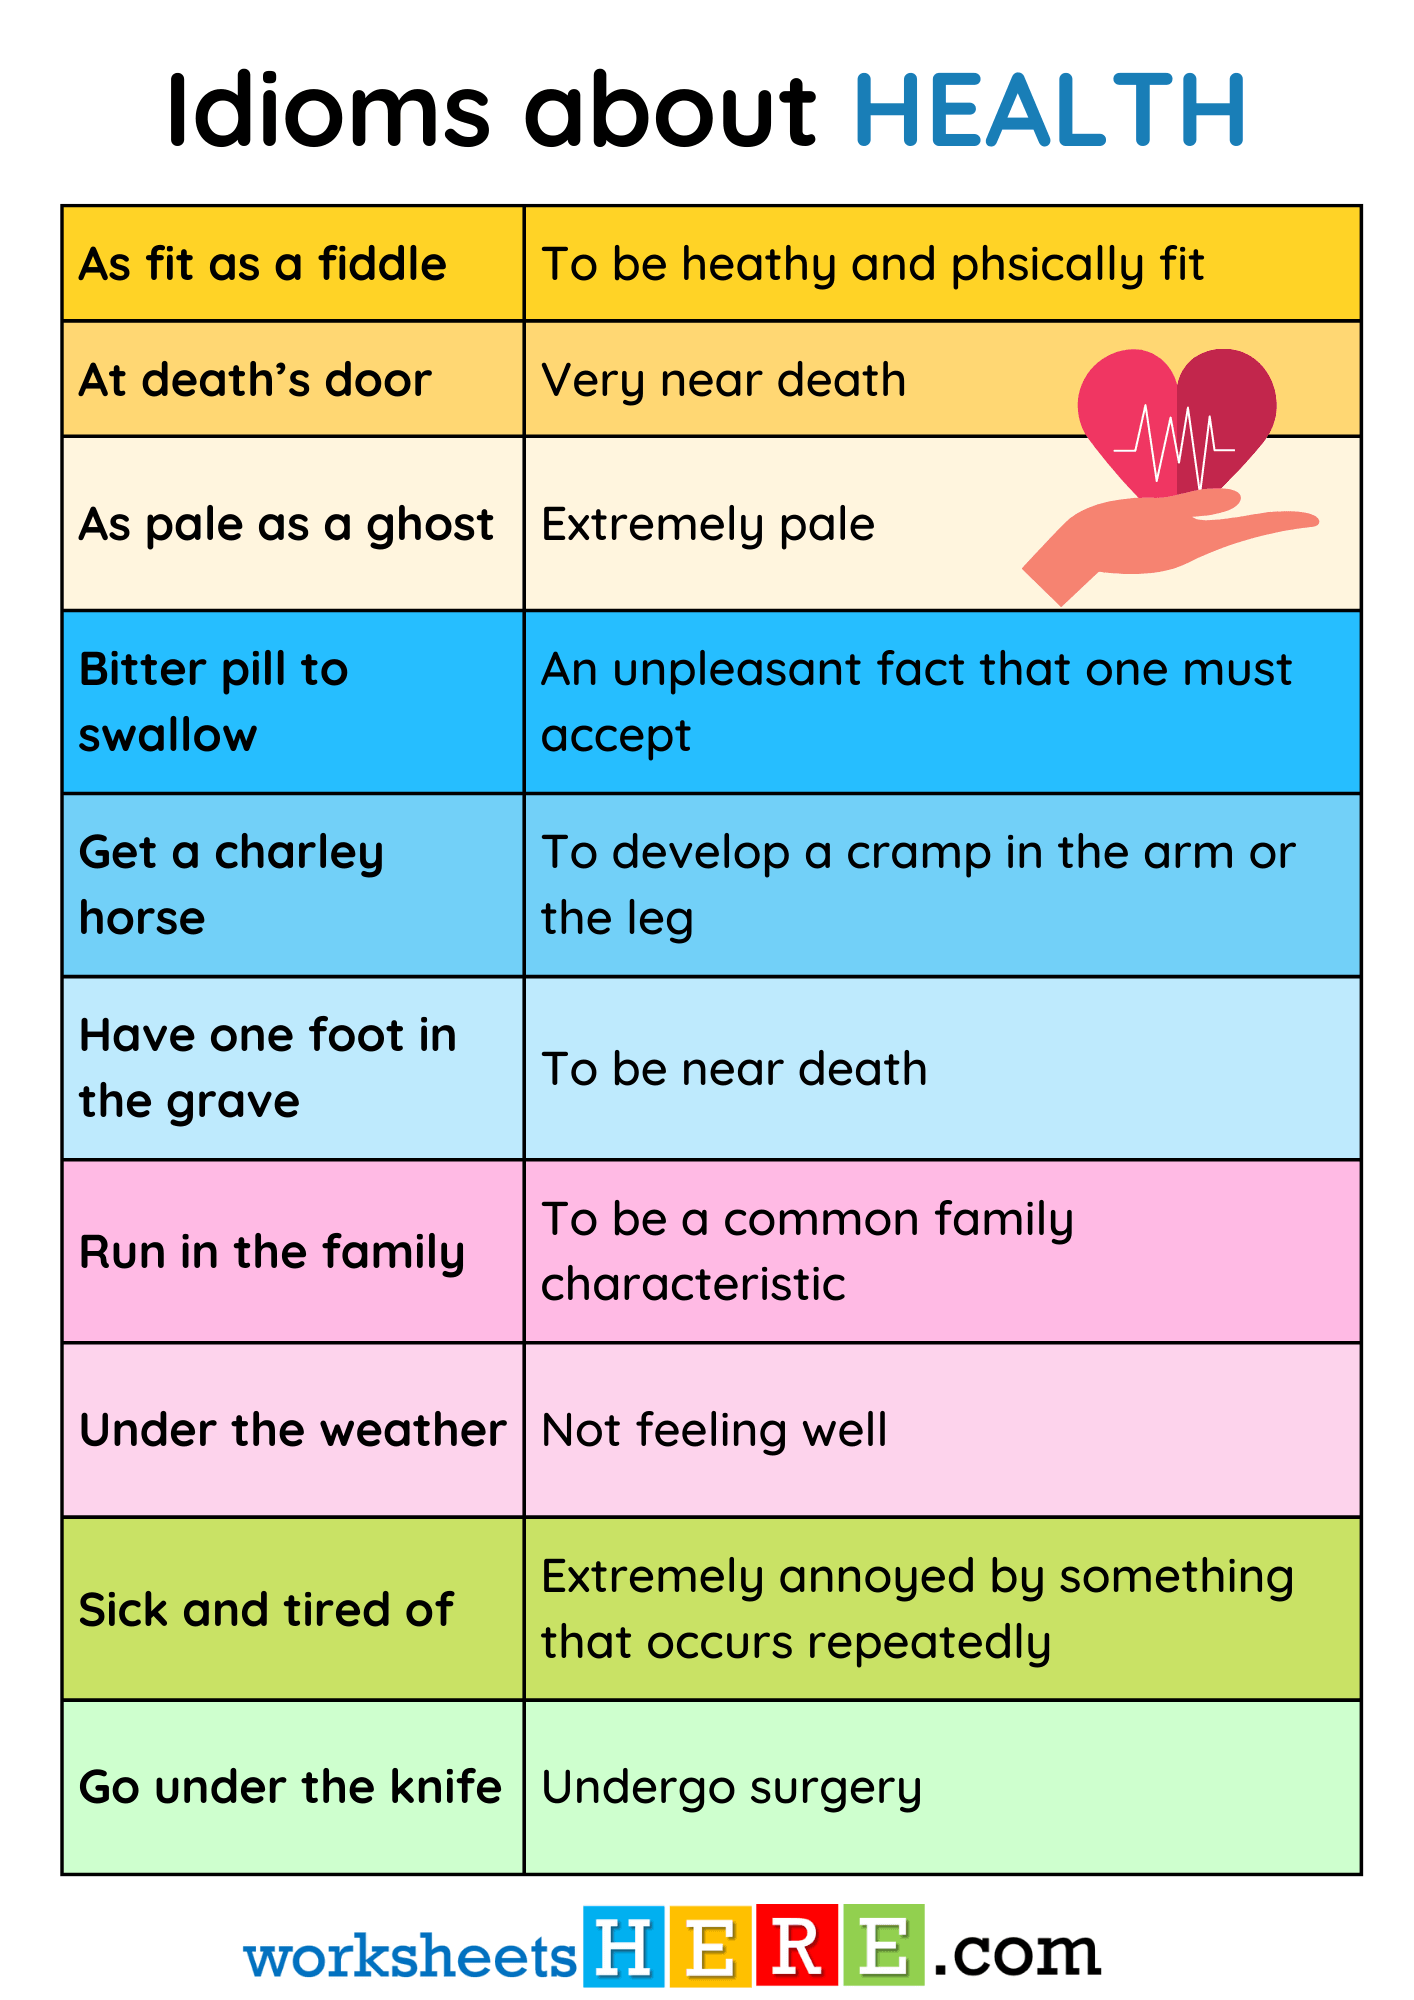 Idioms about HEALTH List and Meaning PDF Worksheet For Students and Kids